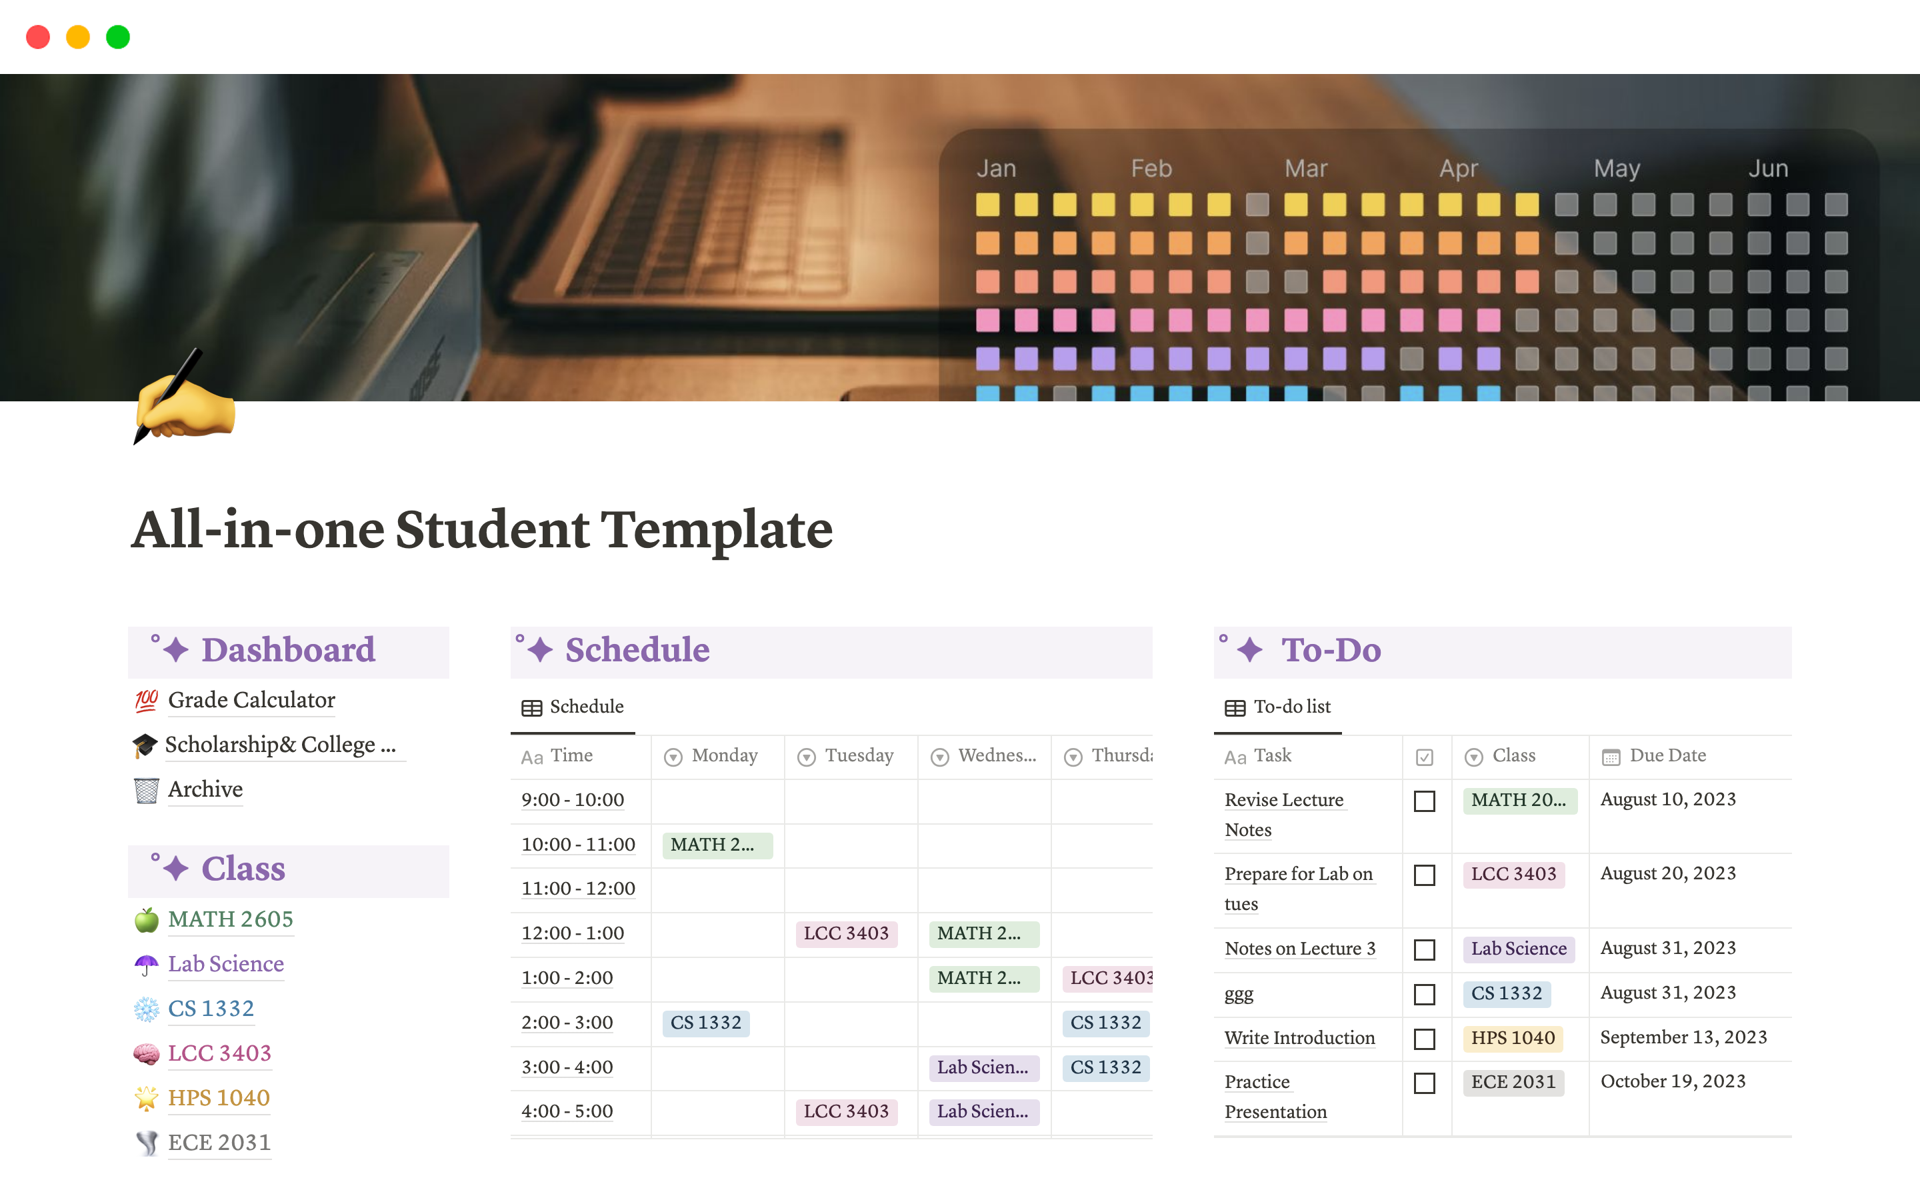 An all-in-one template for a student's academics and extracurricular life